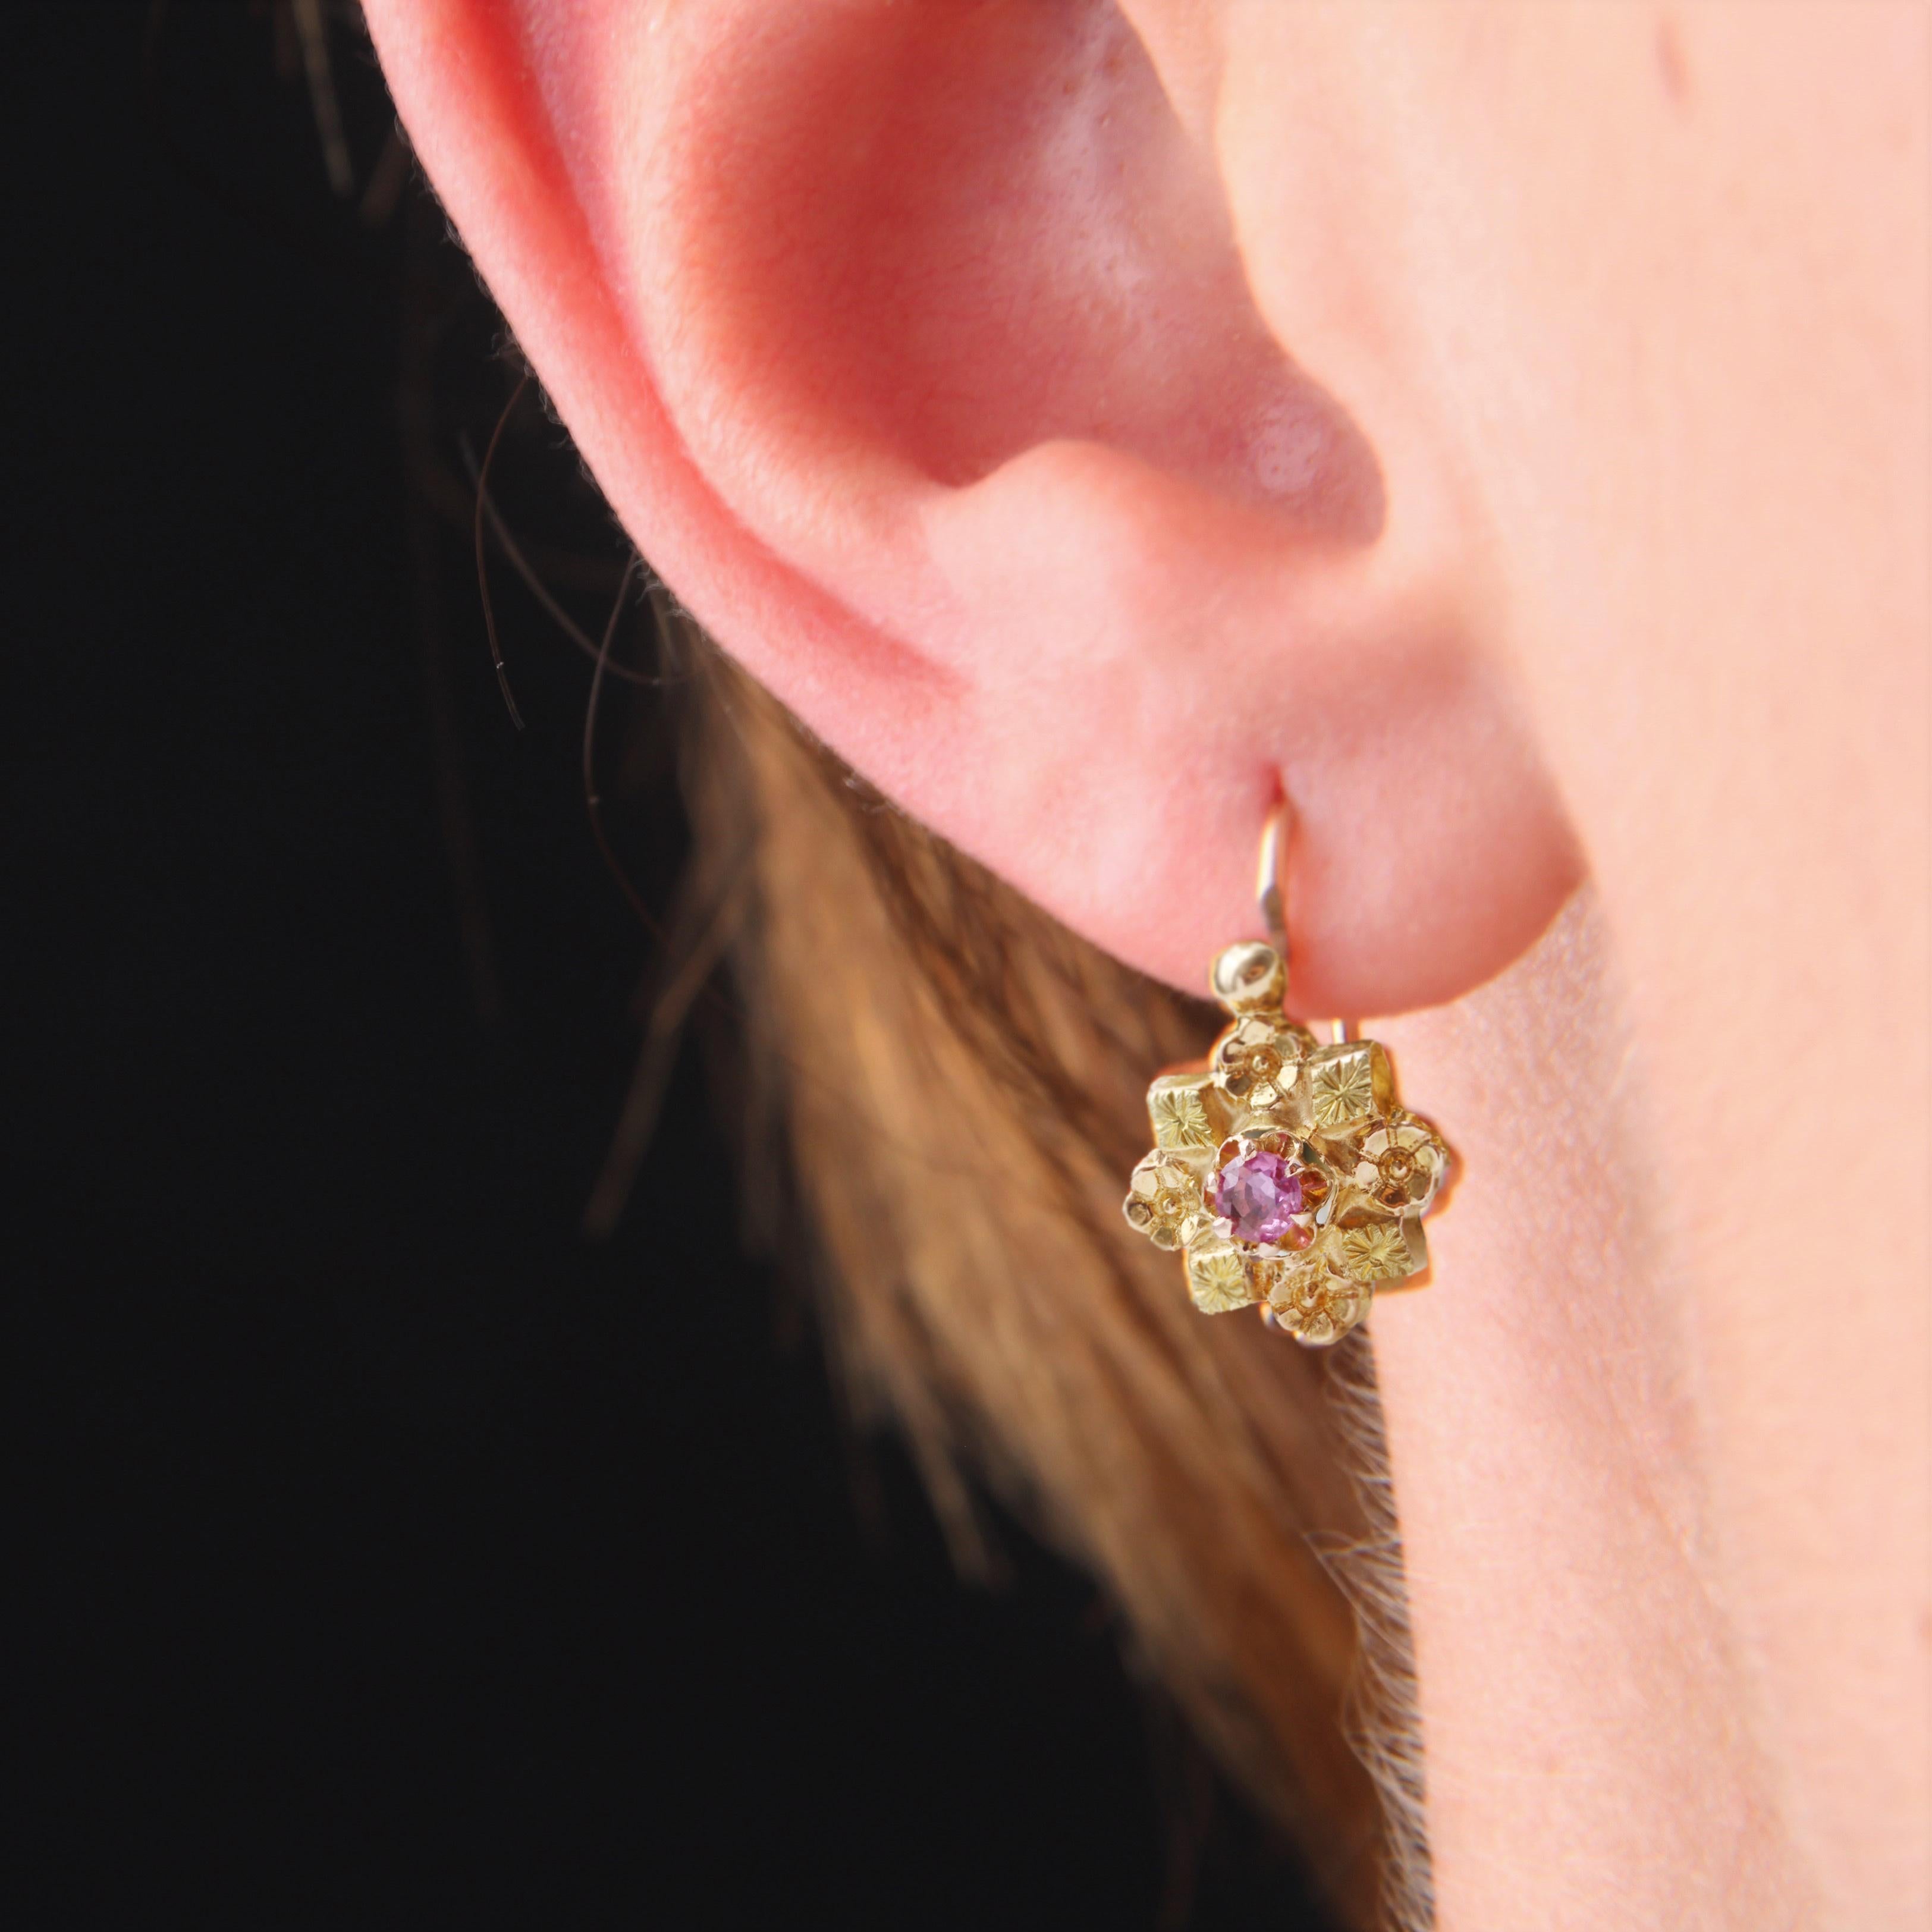 For pierced ears.
Earring in 18 karat rose and green gold, eagle head hallmark.
A charming pair of antique earrings, they form a diamond shape with a rose gold flower alternating with a green gold leaf at each end, topped by a gold pearl. They are